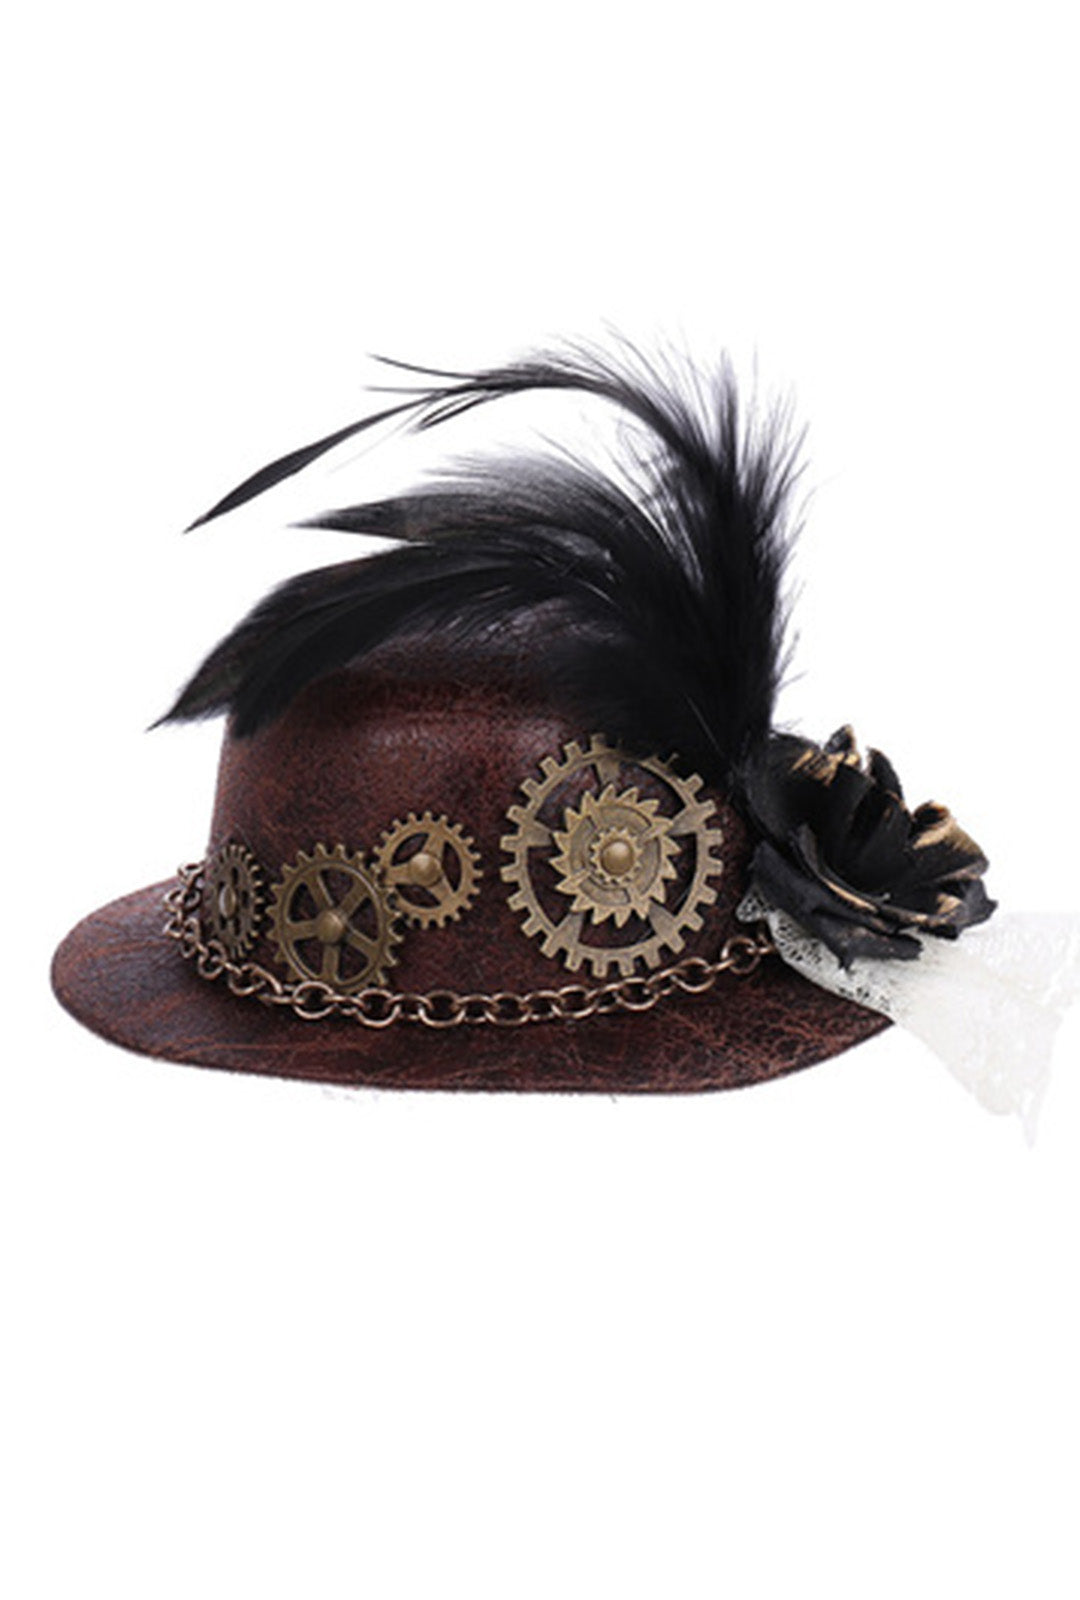 Steampunk Mini Cogs Hat with Feathers